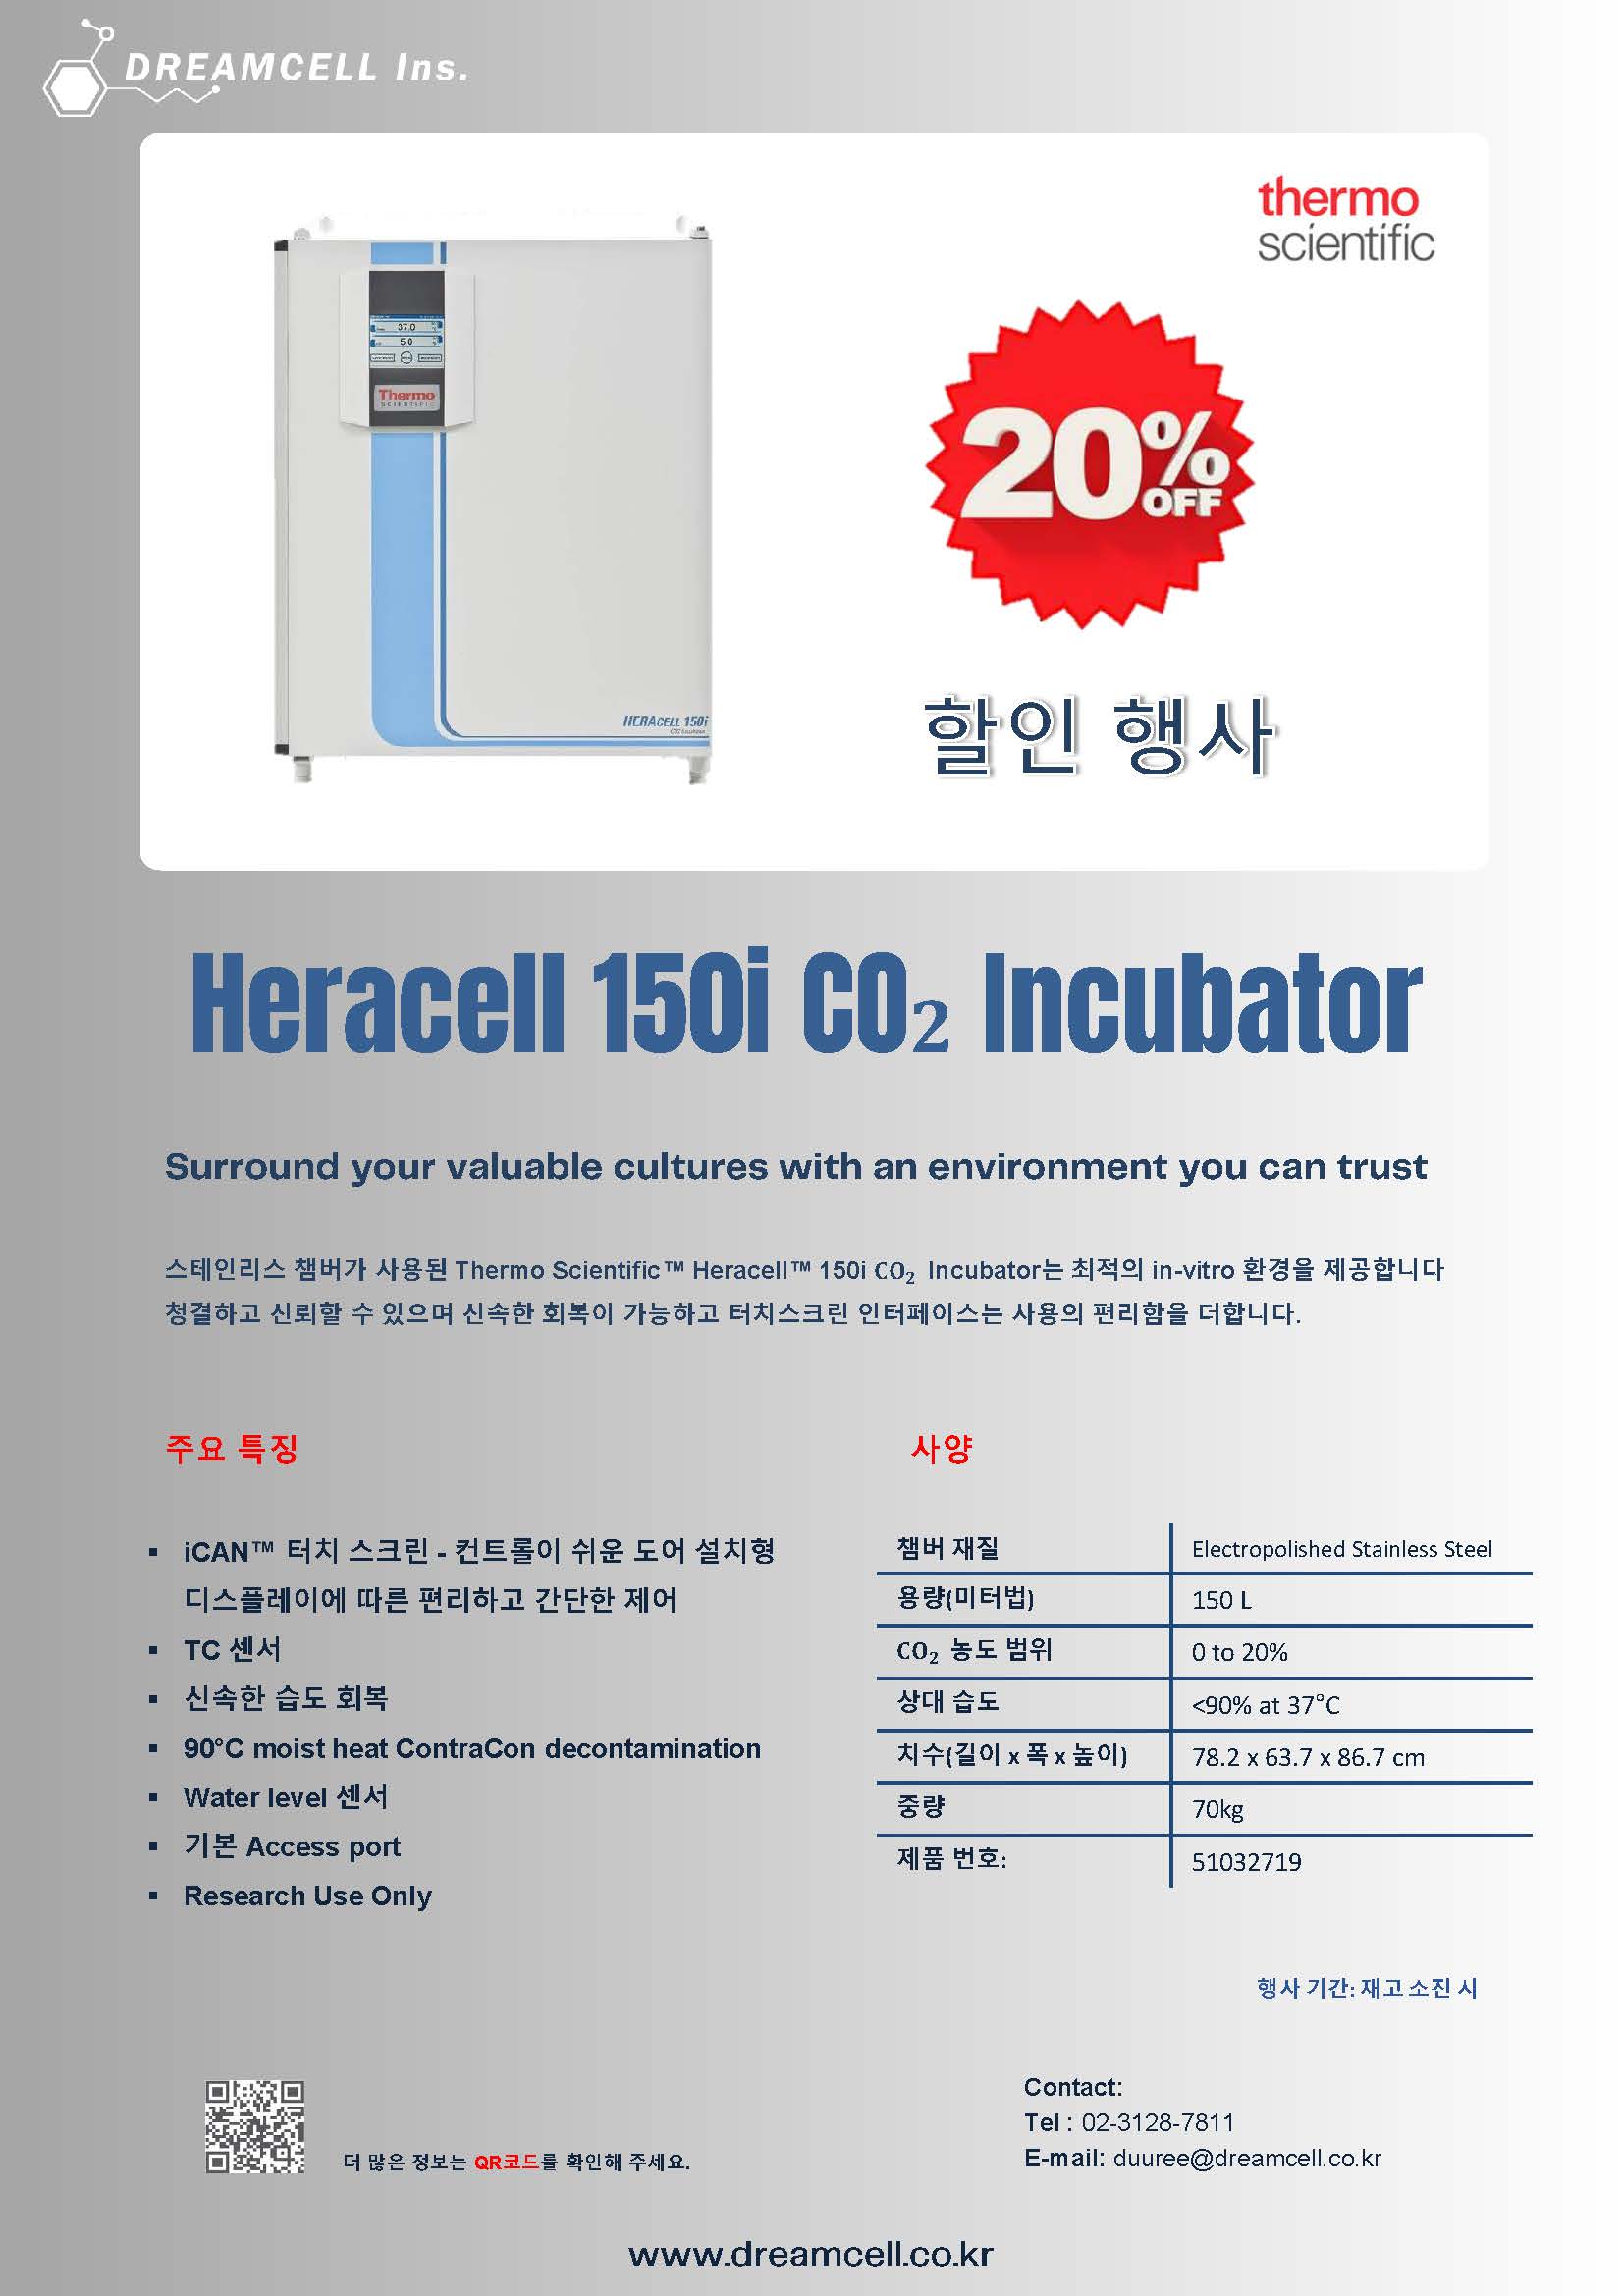 [Thermo Scientific] Heracell 150i CO2 incubator Promotion